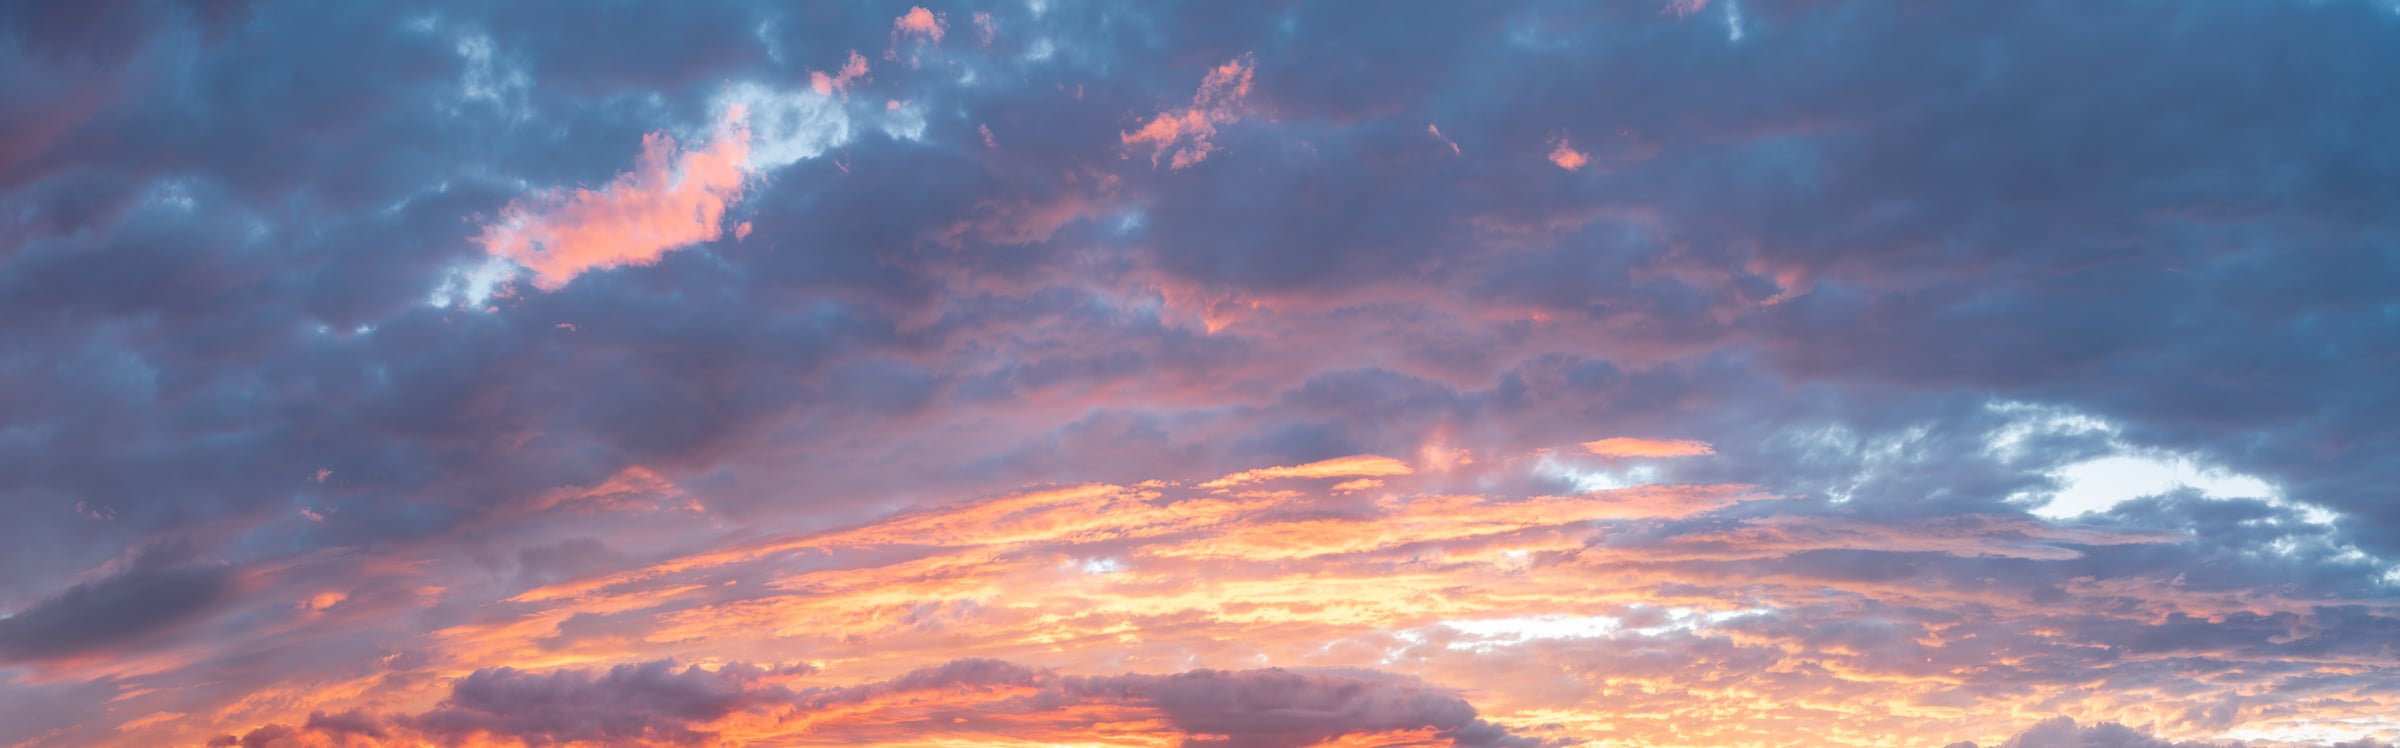 502 megapixels! A very high resolution, large-format VAST photo print of clouds during a beautiful evening sunset; sky photograph created by Greg Probst.